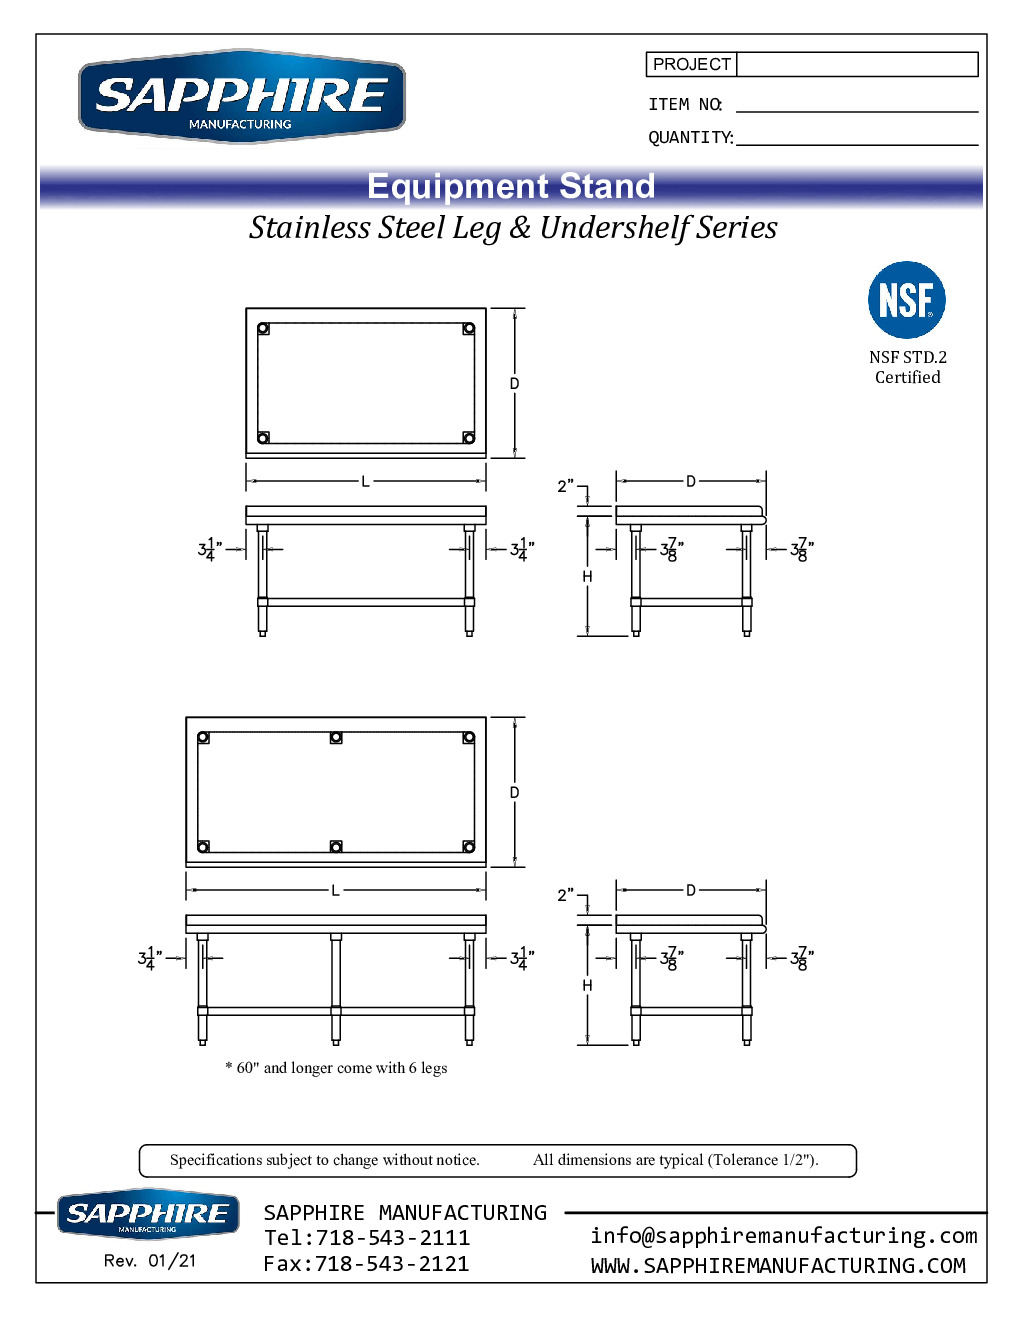 Sapphire Manufacturing SMES-2460S for Countertop Cooking Equipment Stand